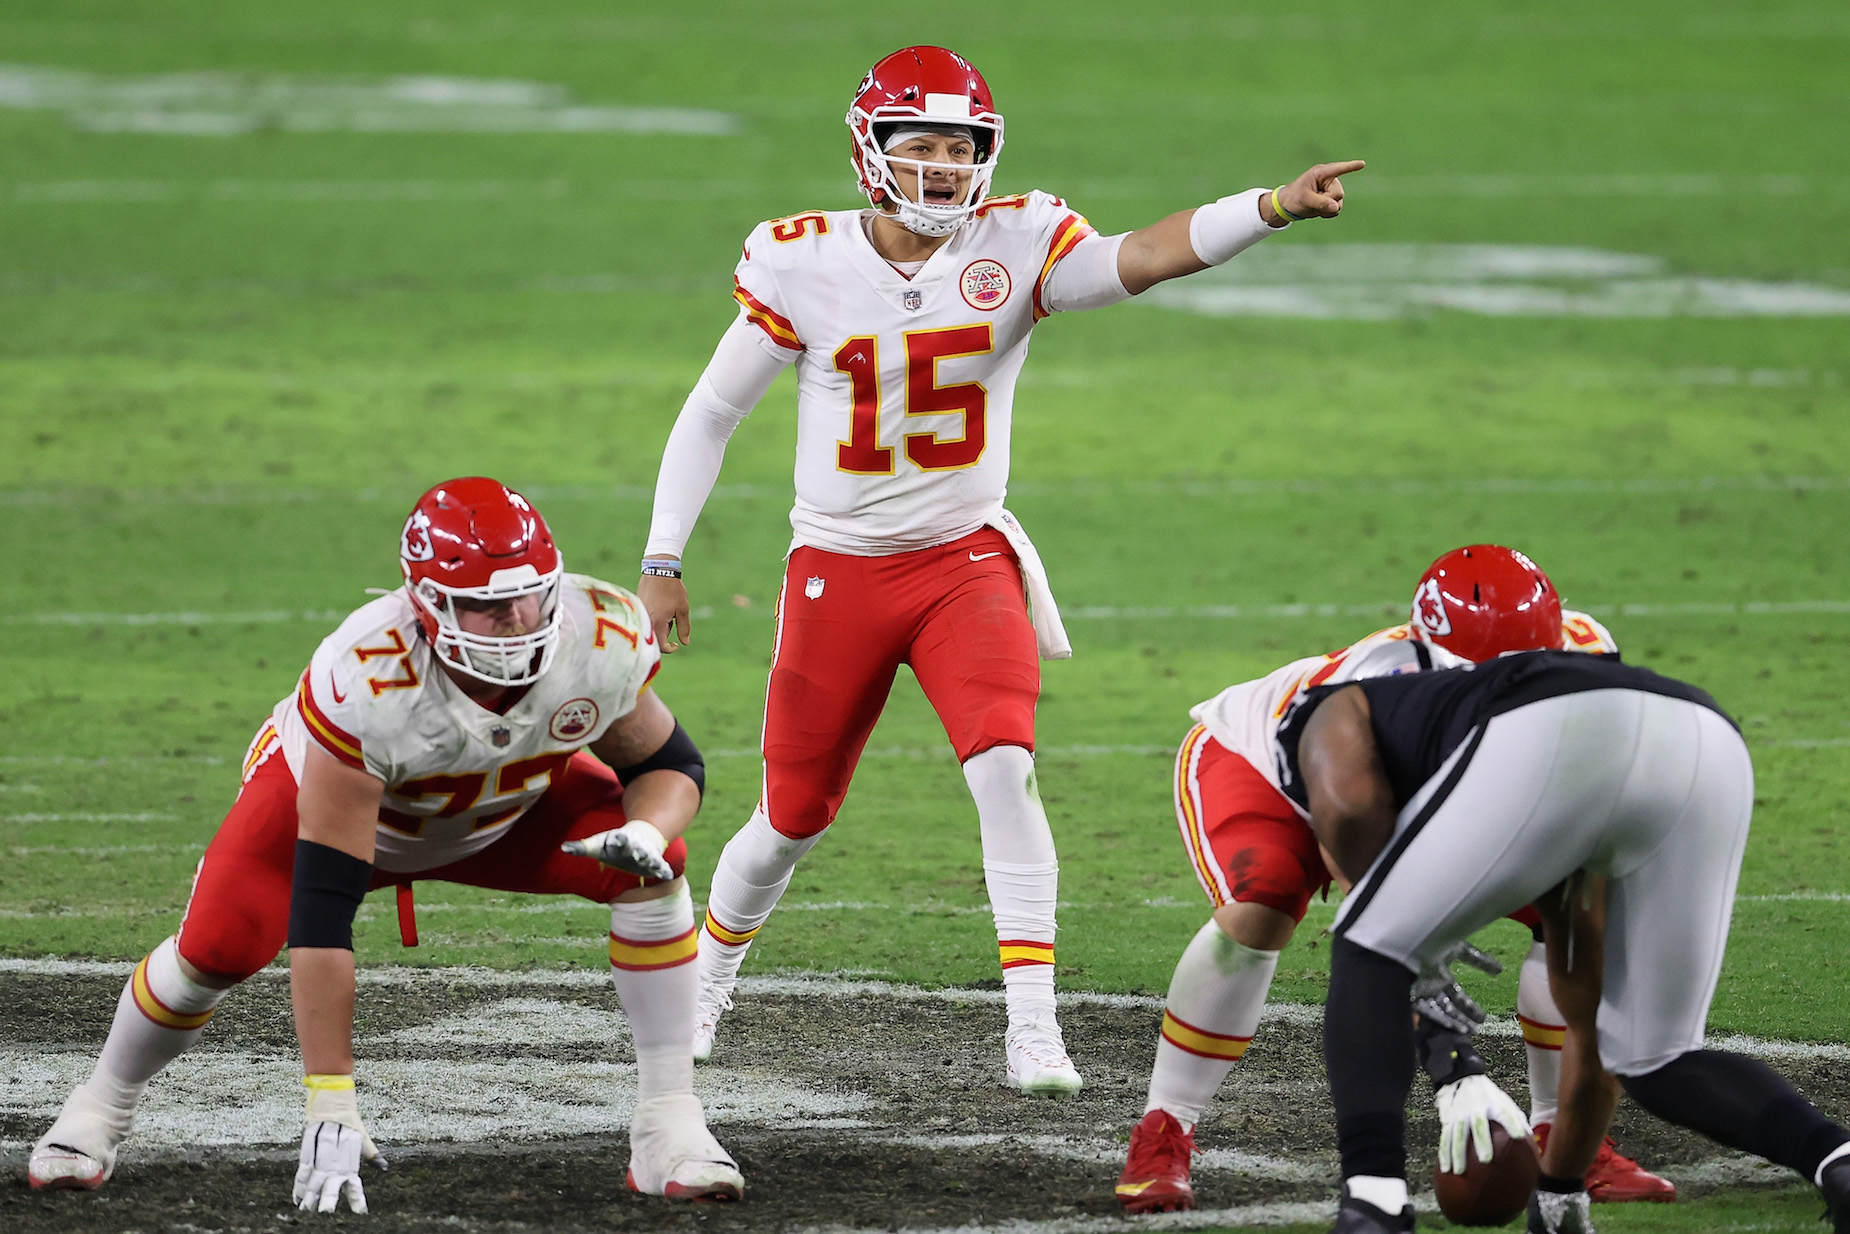 Kansas City Chiefs quarterback Patrick Mahomes received a high compliment from a rival head coach.